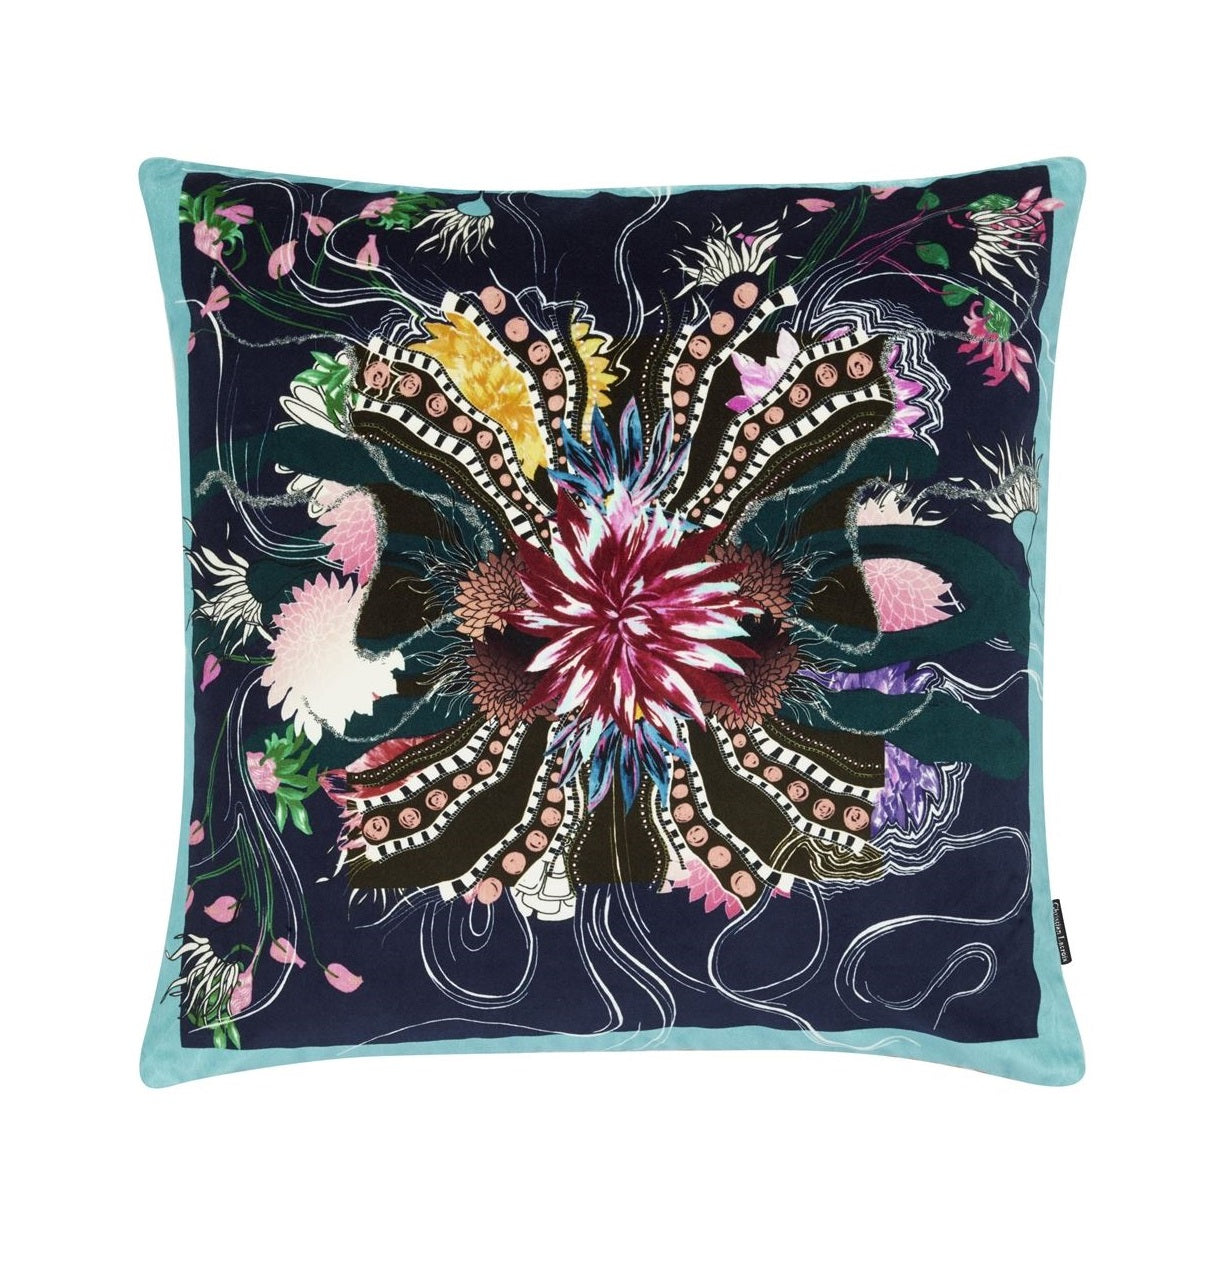 Two-sided pillow OCEAN BLOOMS RUISSEAU cotton satin - Eye on Design